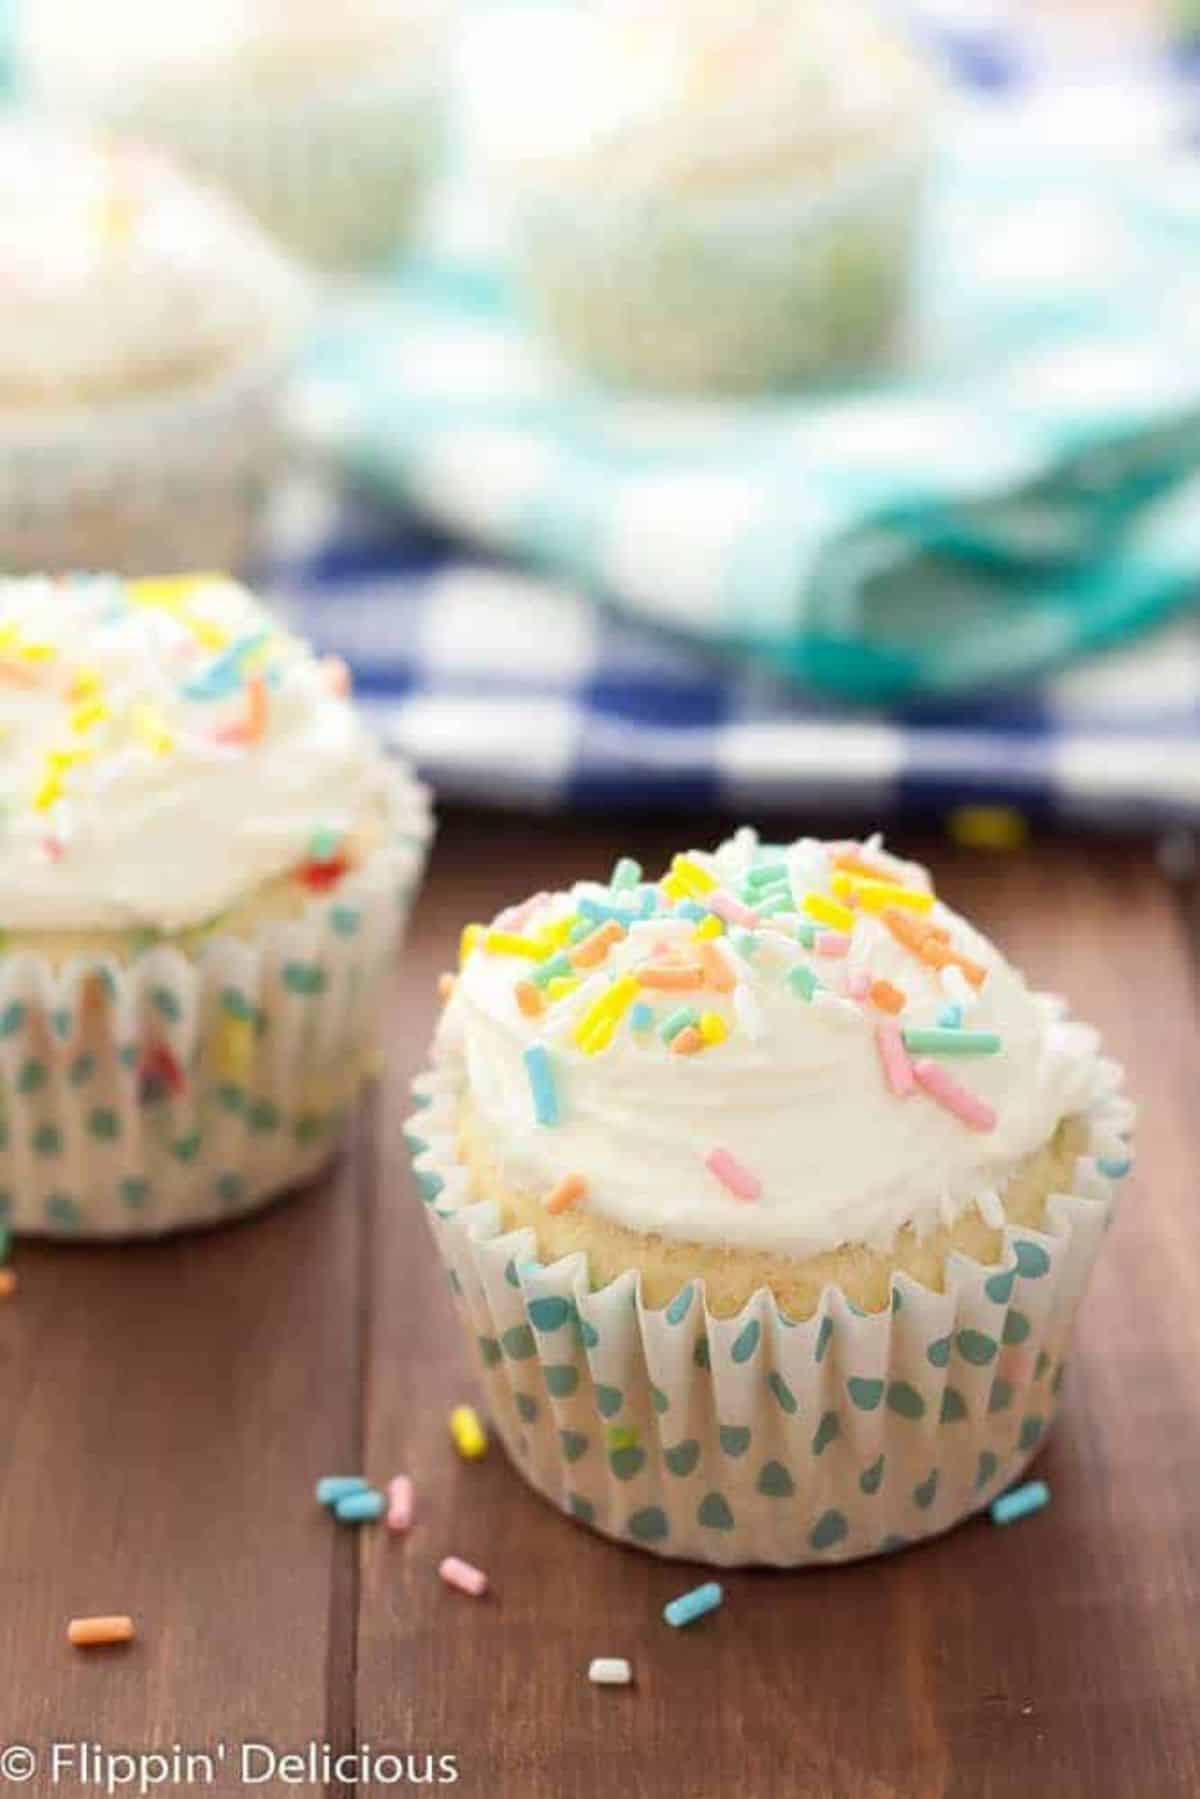 Tasty Funfetti Cupcakes with Cake Batter Frosting on a wodoen table.